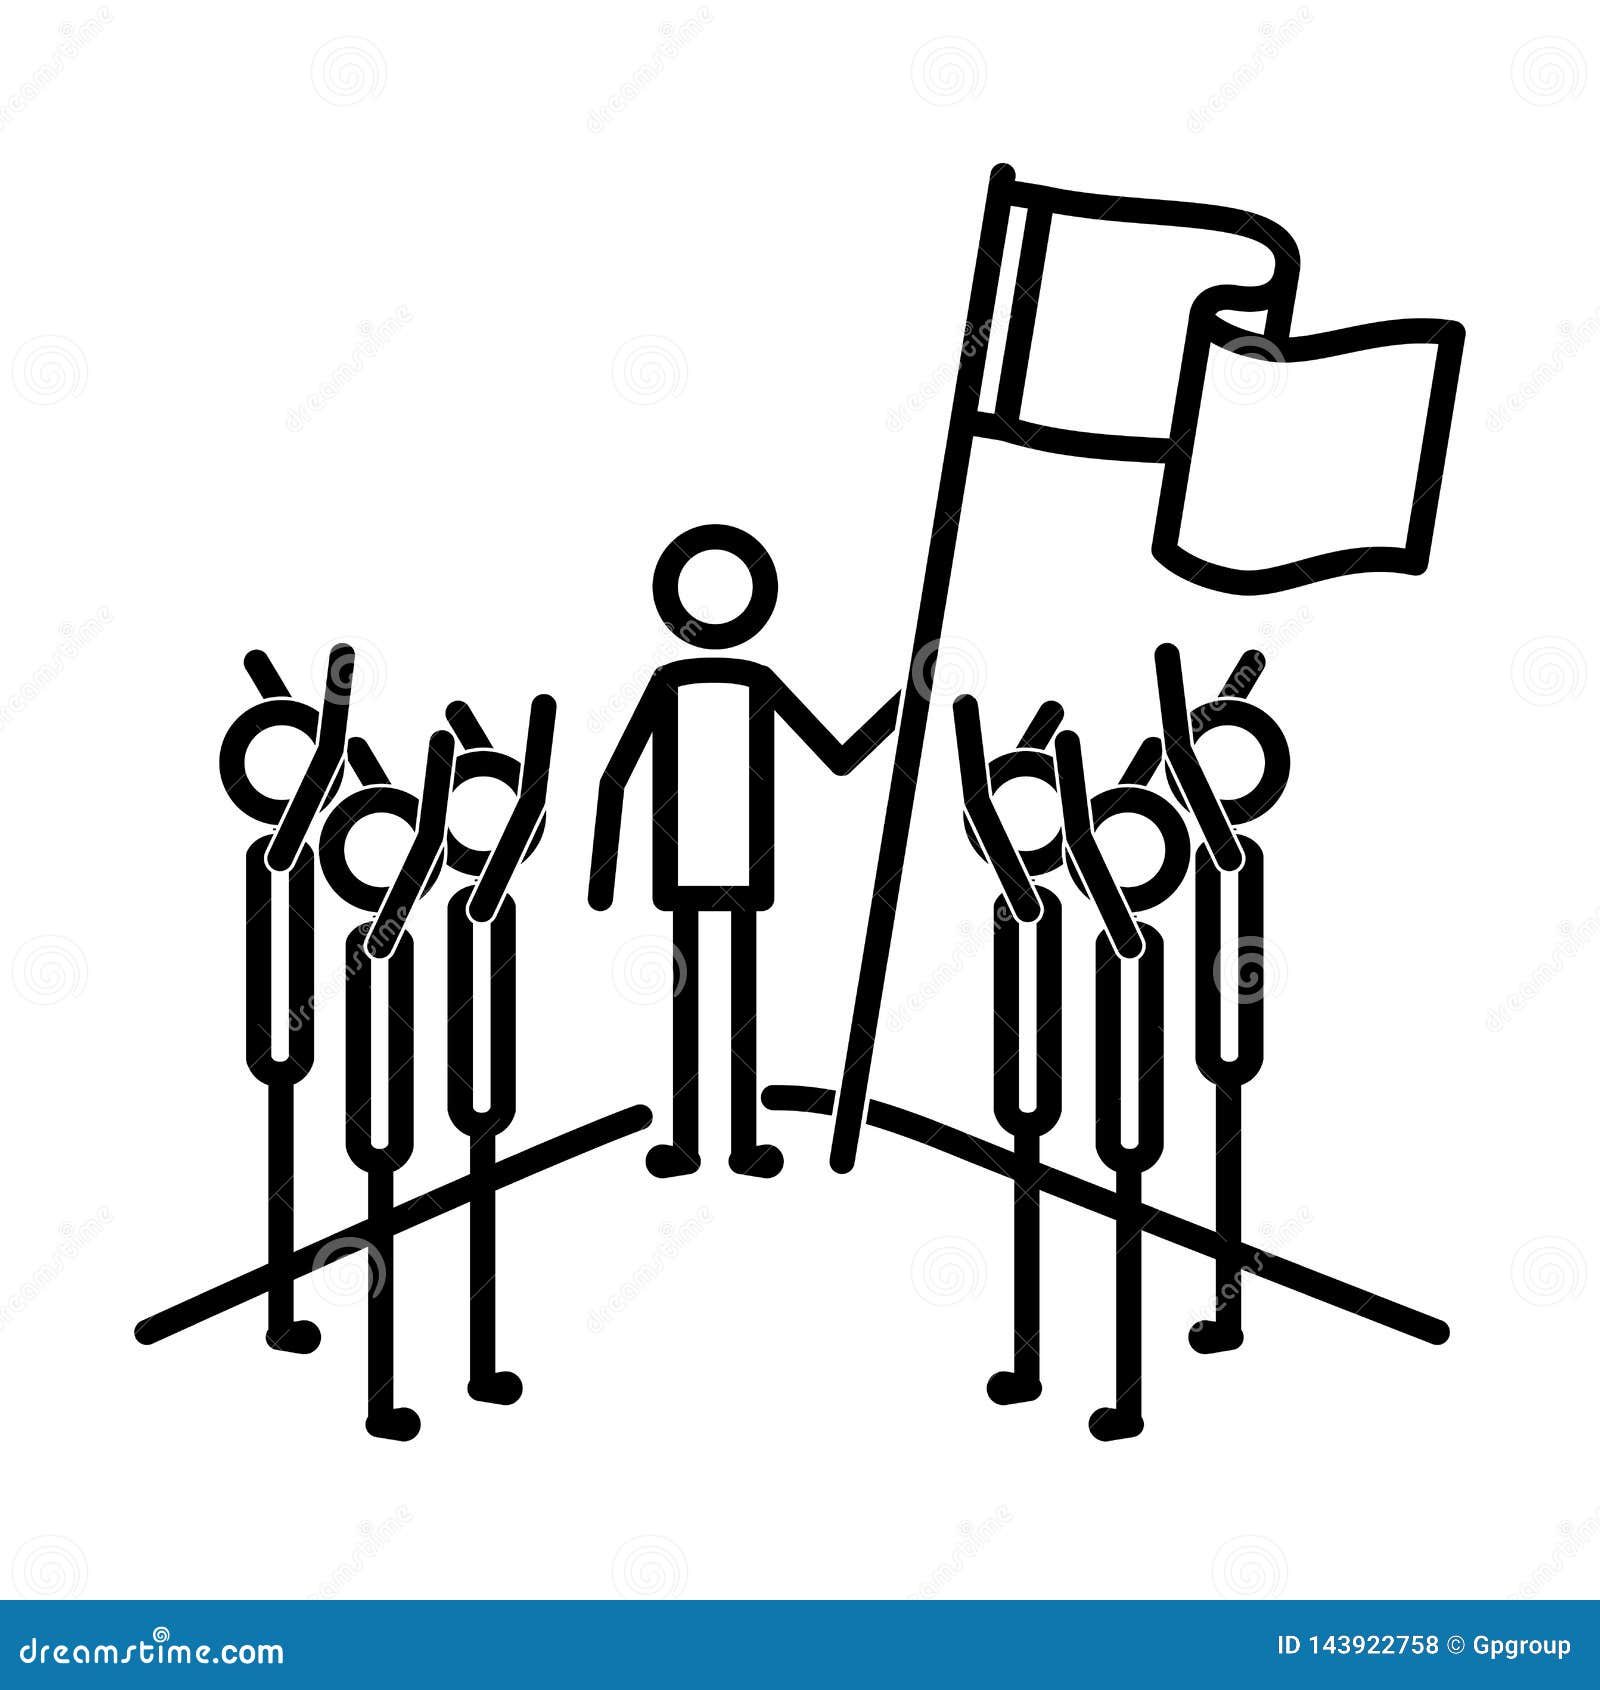 Group of Men with Flag Silhouettes Stock Vector - Illustration of ...